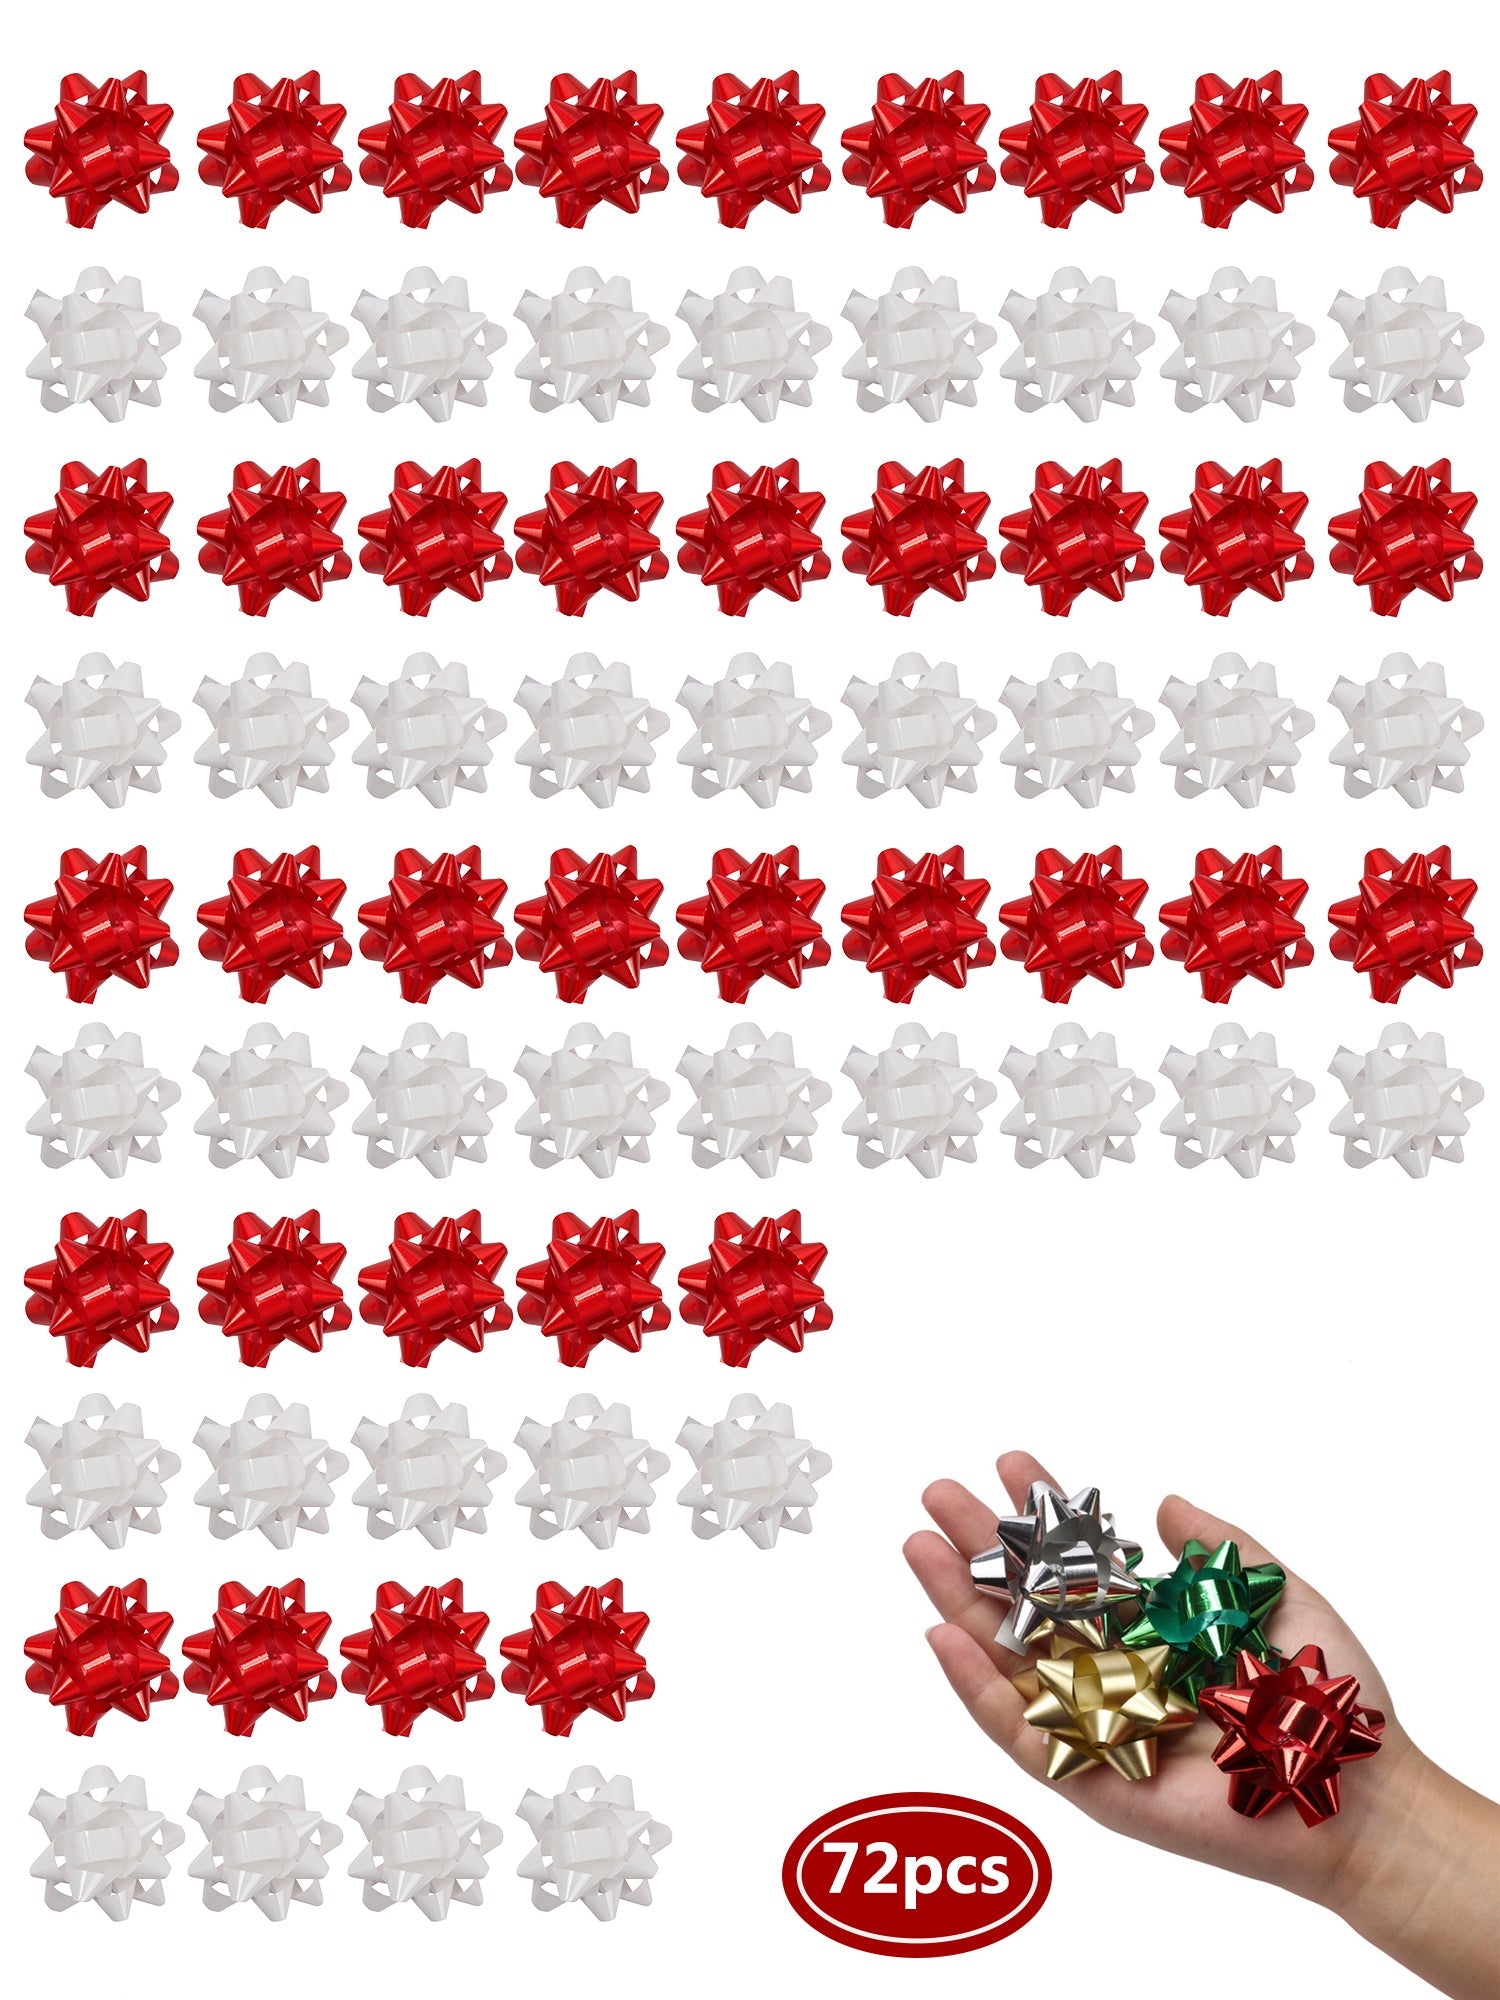 2" Christmas Star Gift Bow Bundle - White/Red 72 pcs